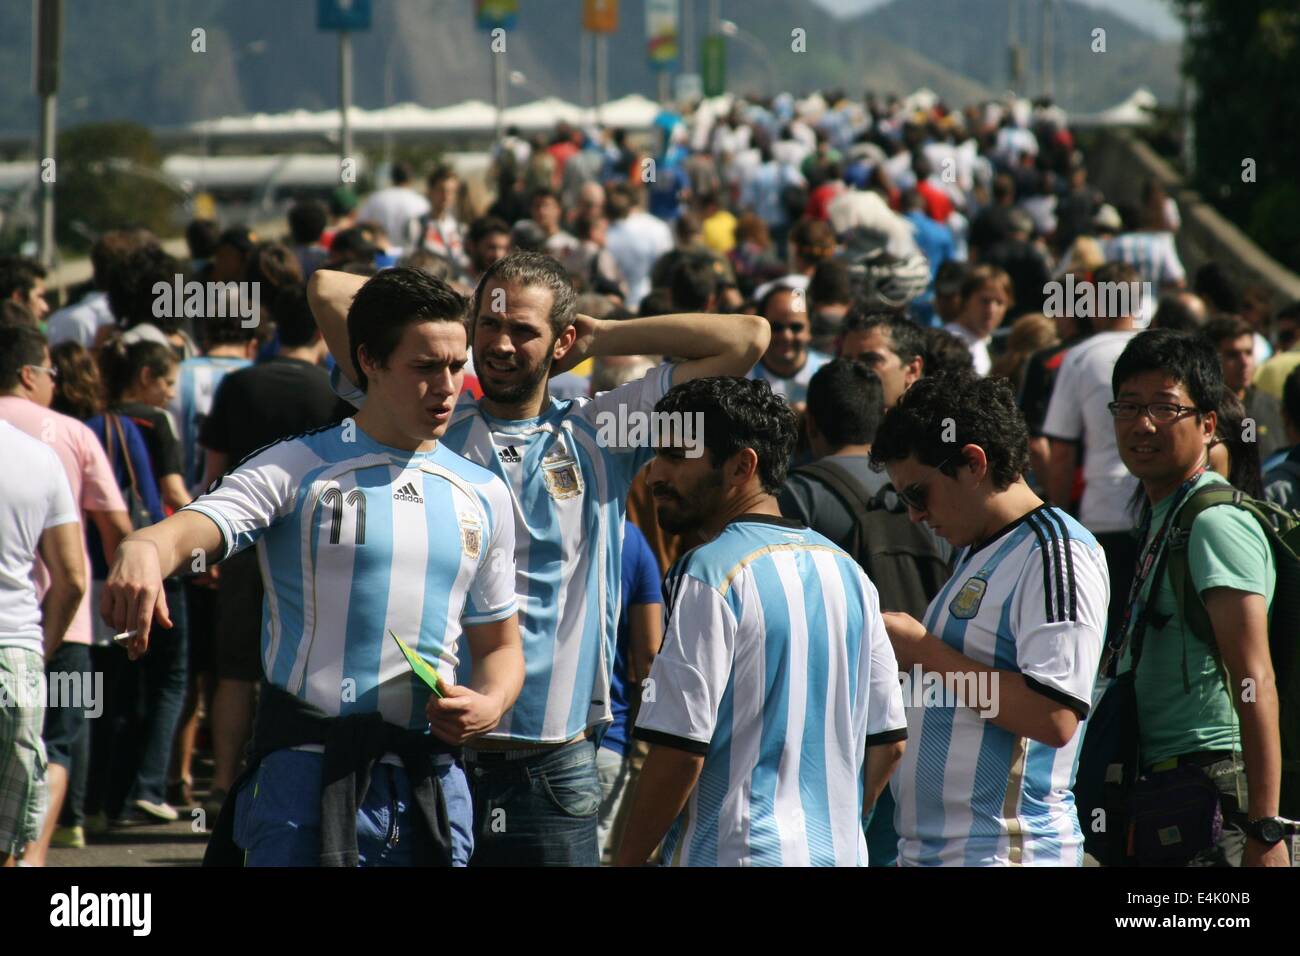 Rio de Janeiro, Brazil. 13th July, 2014. 2014 FIFA World Cup Brazil. A group of Argentinian fans in the crowd arriving at Maracanã to watch the final match between Germany and Argentina. Germany won 1-0 in the extra time, thus conquering its fourth world title. Rio de Janeiro, Brazil, 13th July, 2014. Credit:  Maria Adelaide Silva/Alamy Live News Stock Photo